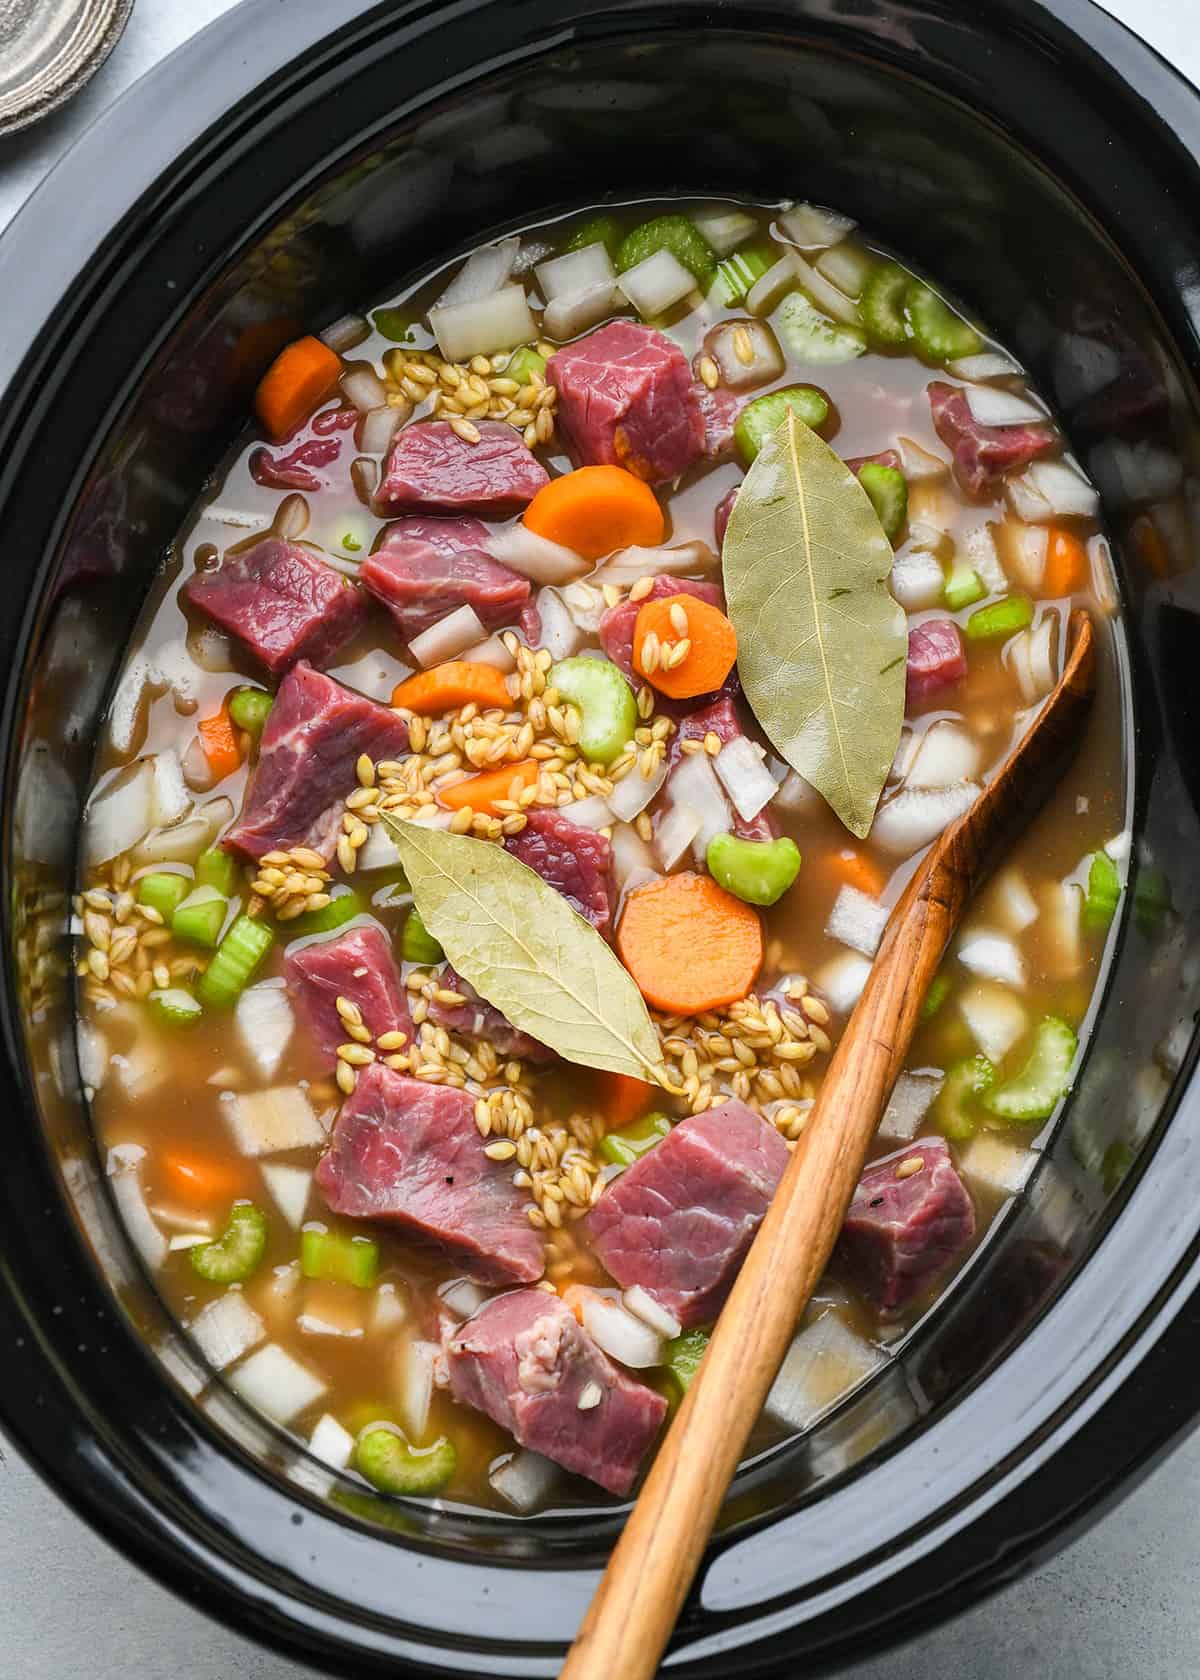 Beef Barley Soup in a slow cooker before cooking